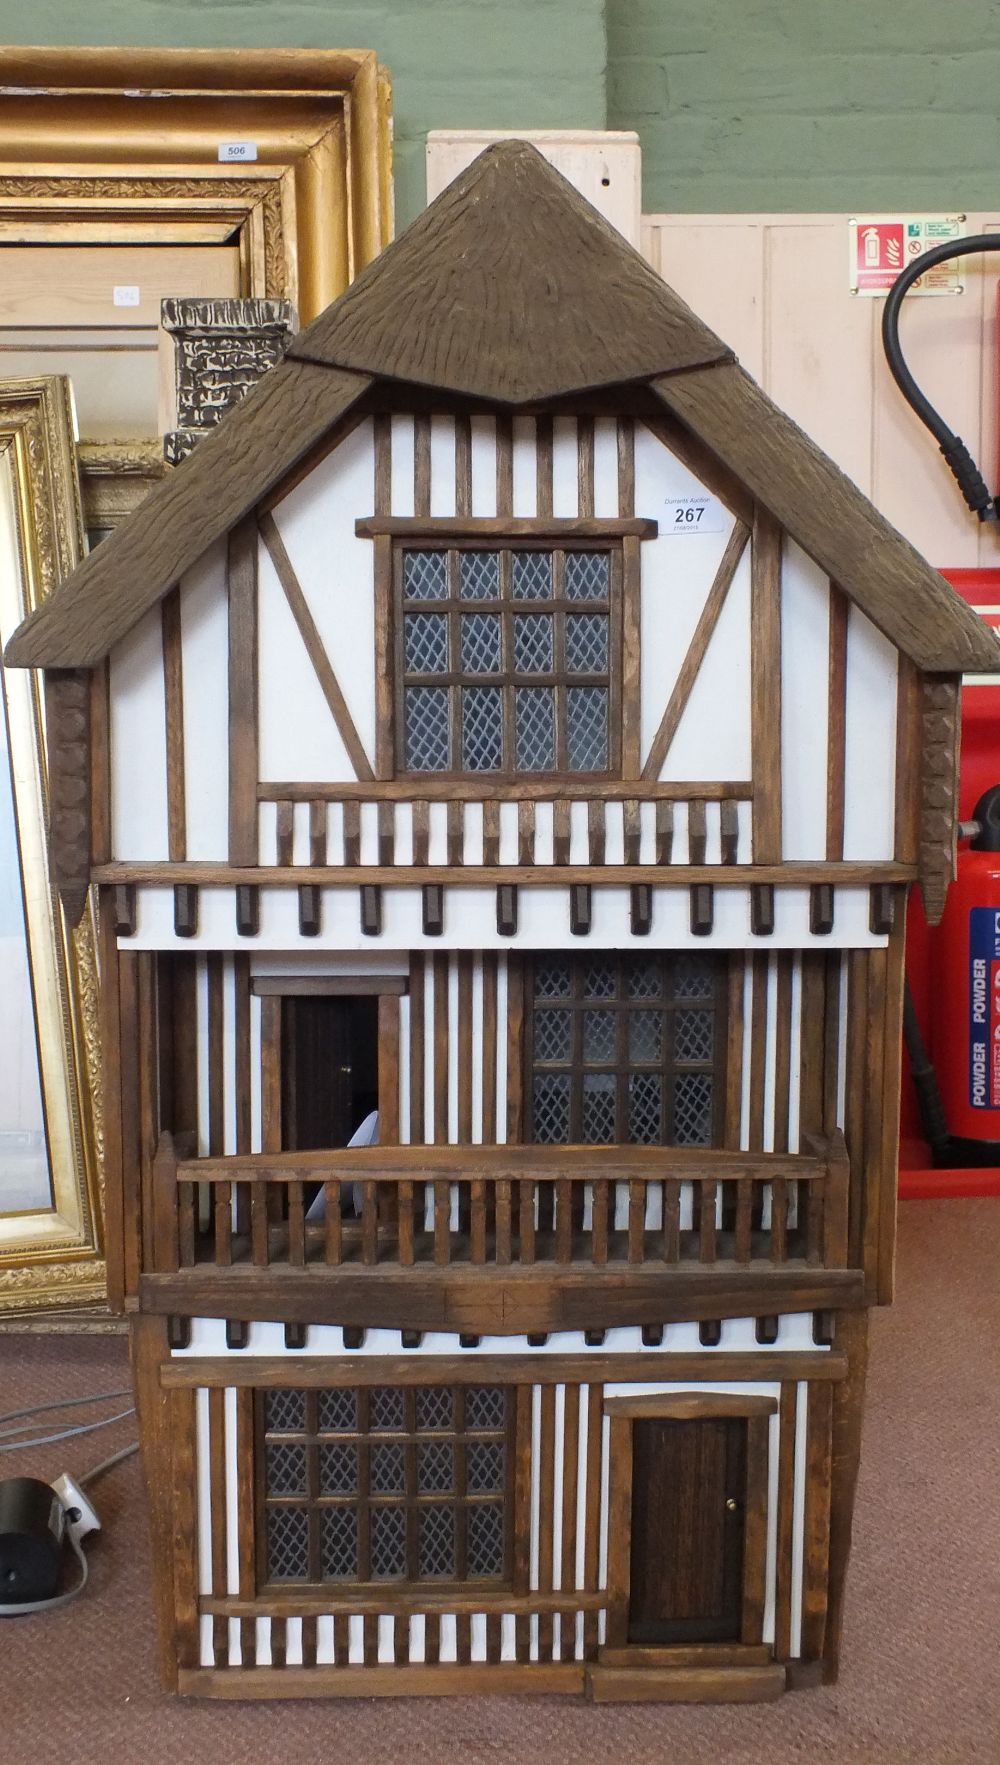 Robert Stubbs Tudor style dolls house and furniture - Image 2 of 4